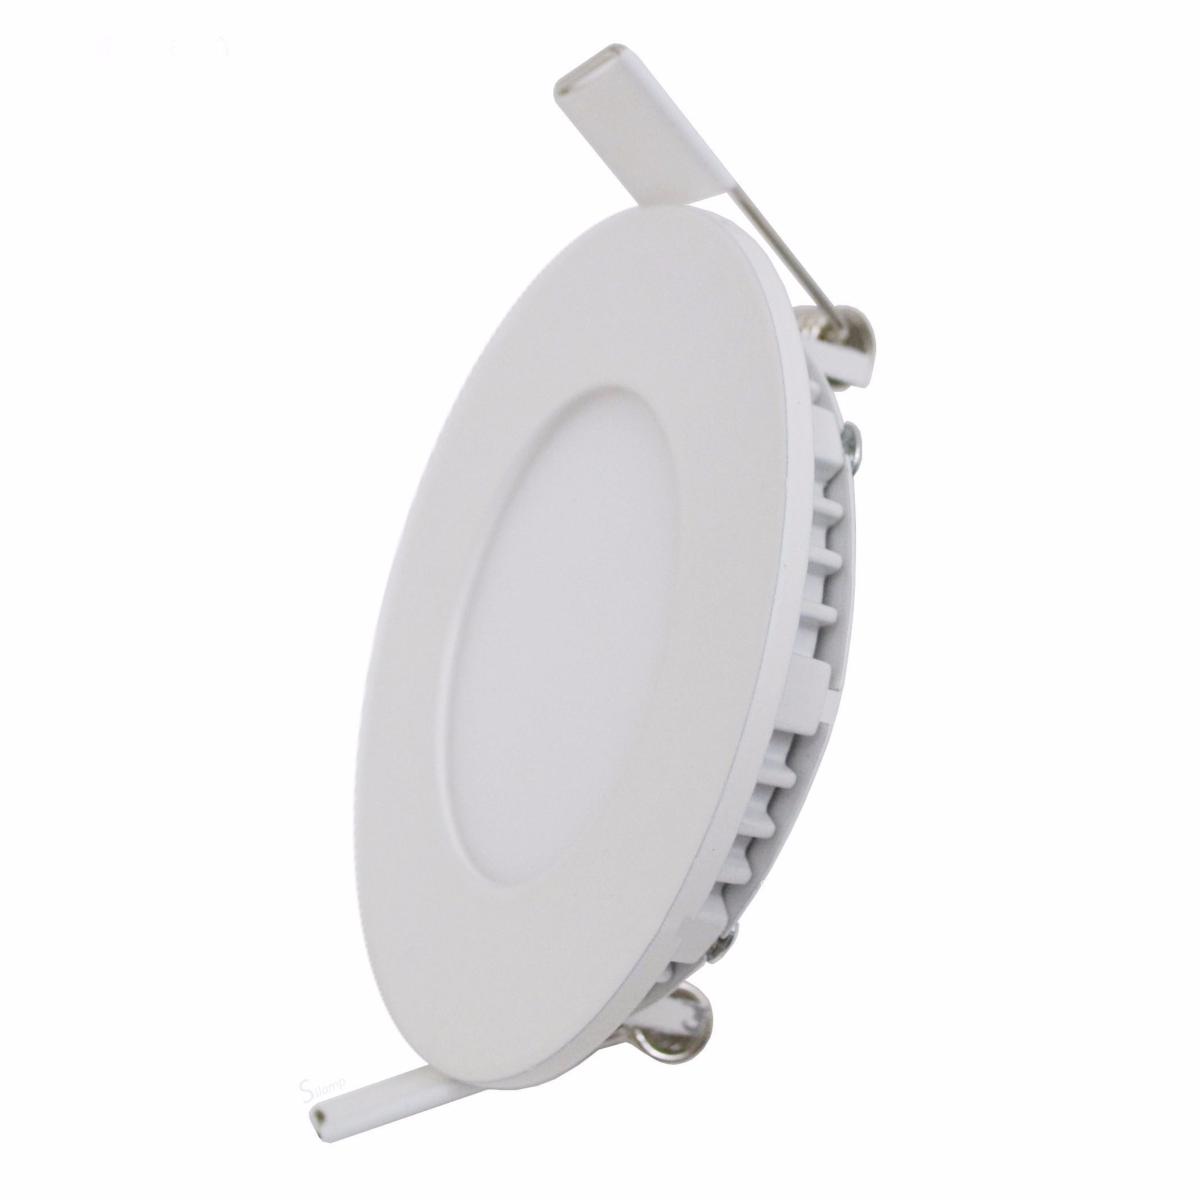 Spot LED Extra Plat Rond 6W Blanc - Silamp France